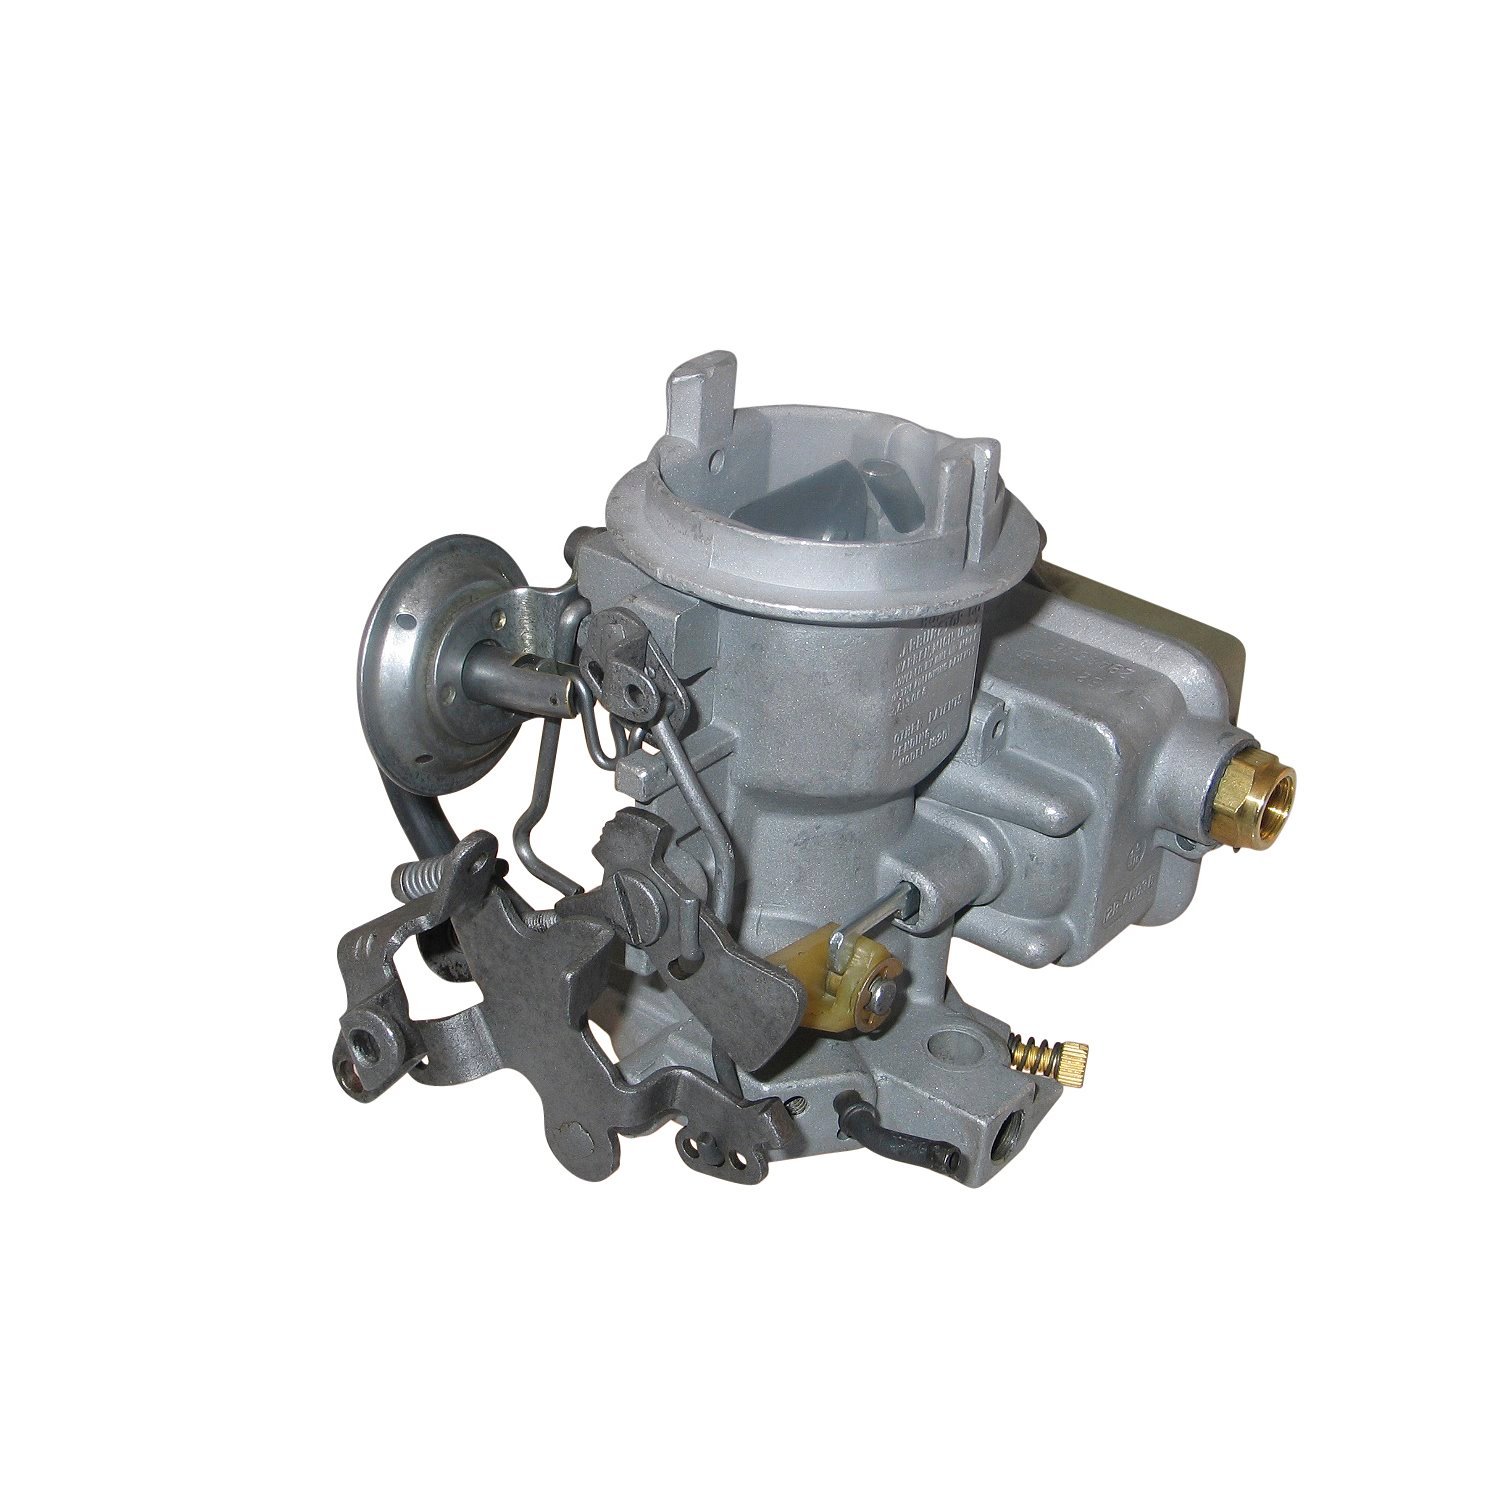 6-6133 Holley Remanufactured Carburetor, 1920-Style